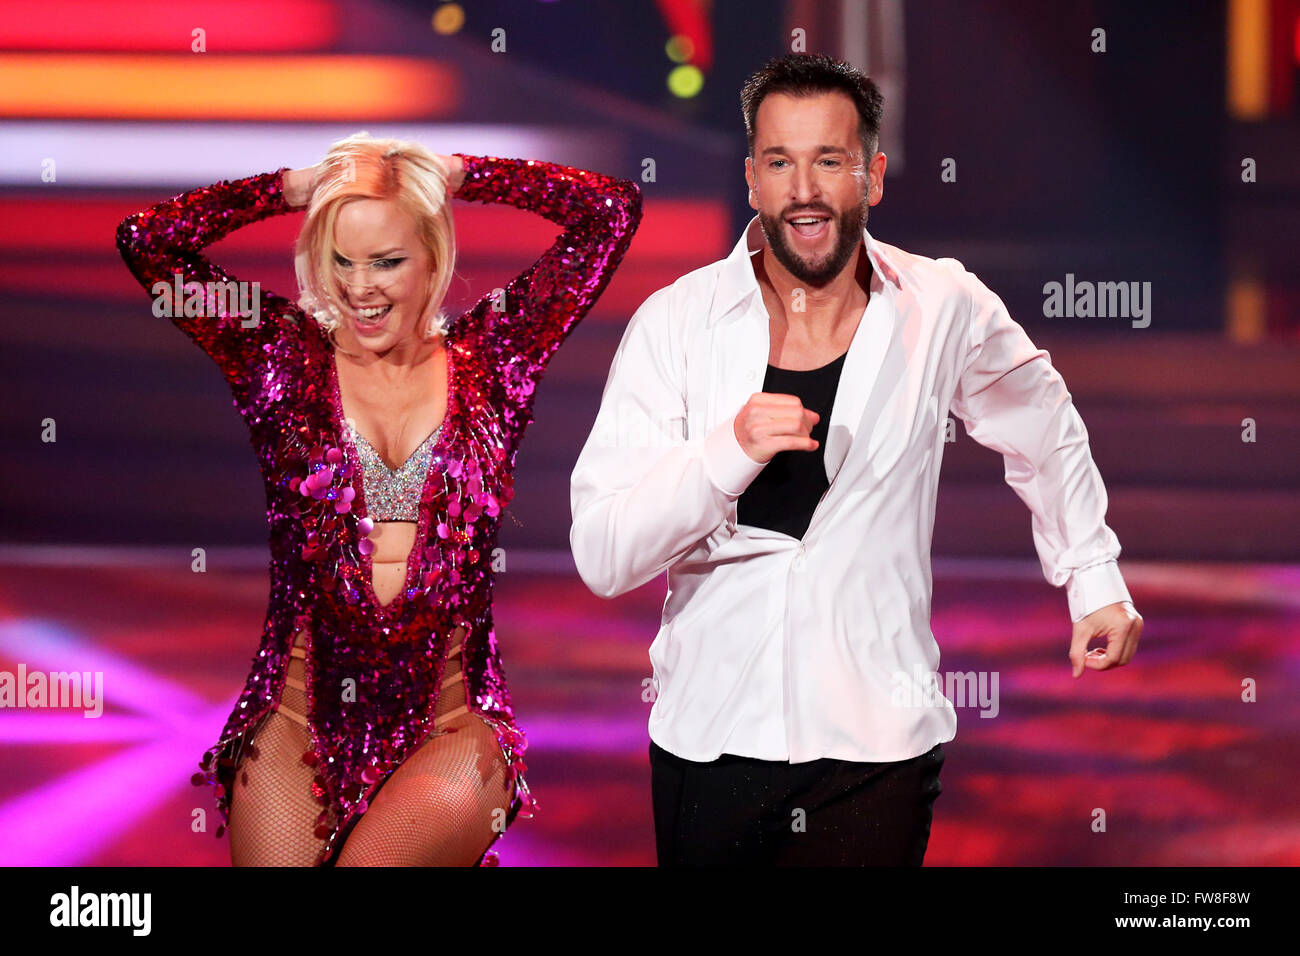 Michael Wendler and professional dancer Isabel Edvardsson dance during the RTL dance show 'Let's Dance' in the Coloneum in Cologne, Germany, 01 April 2016. Photo: ROLF VENNENBERND/dpa Stock Photo